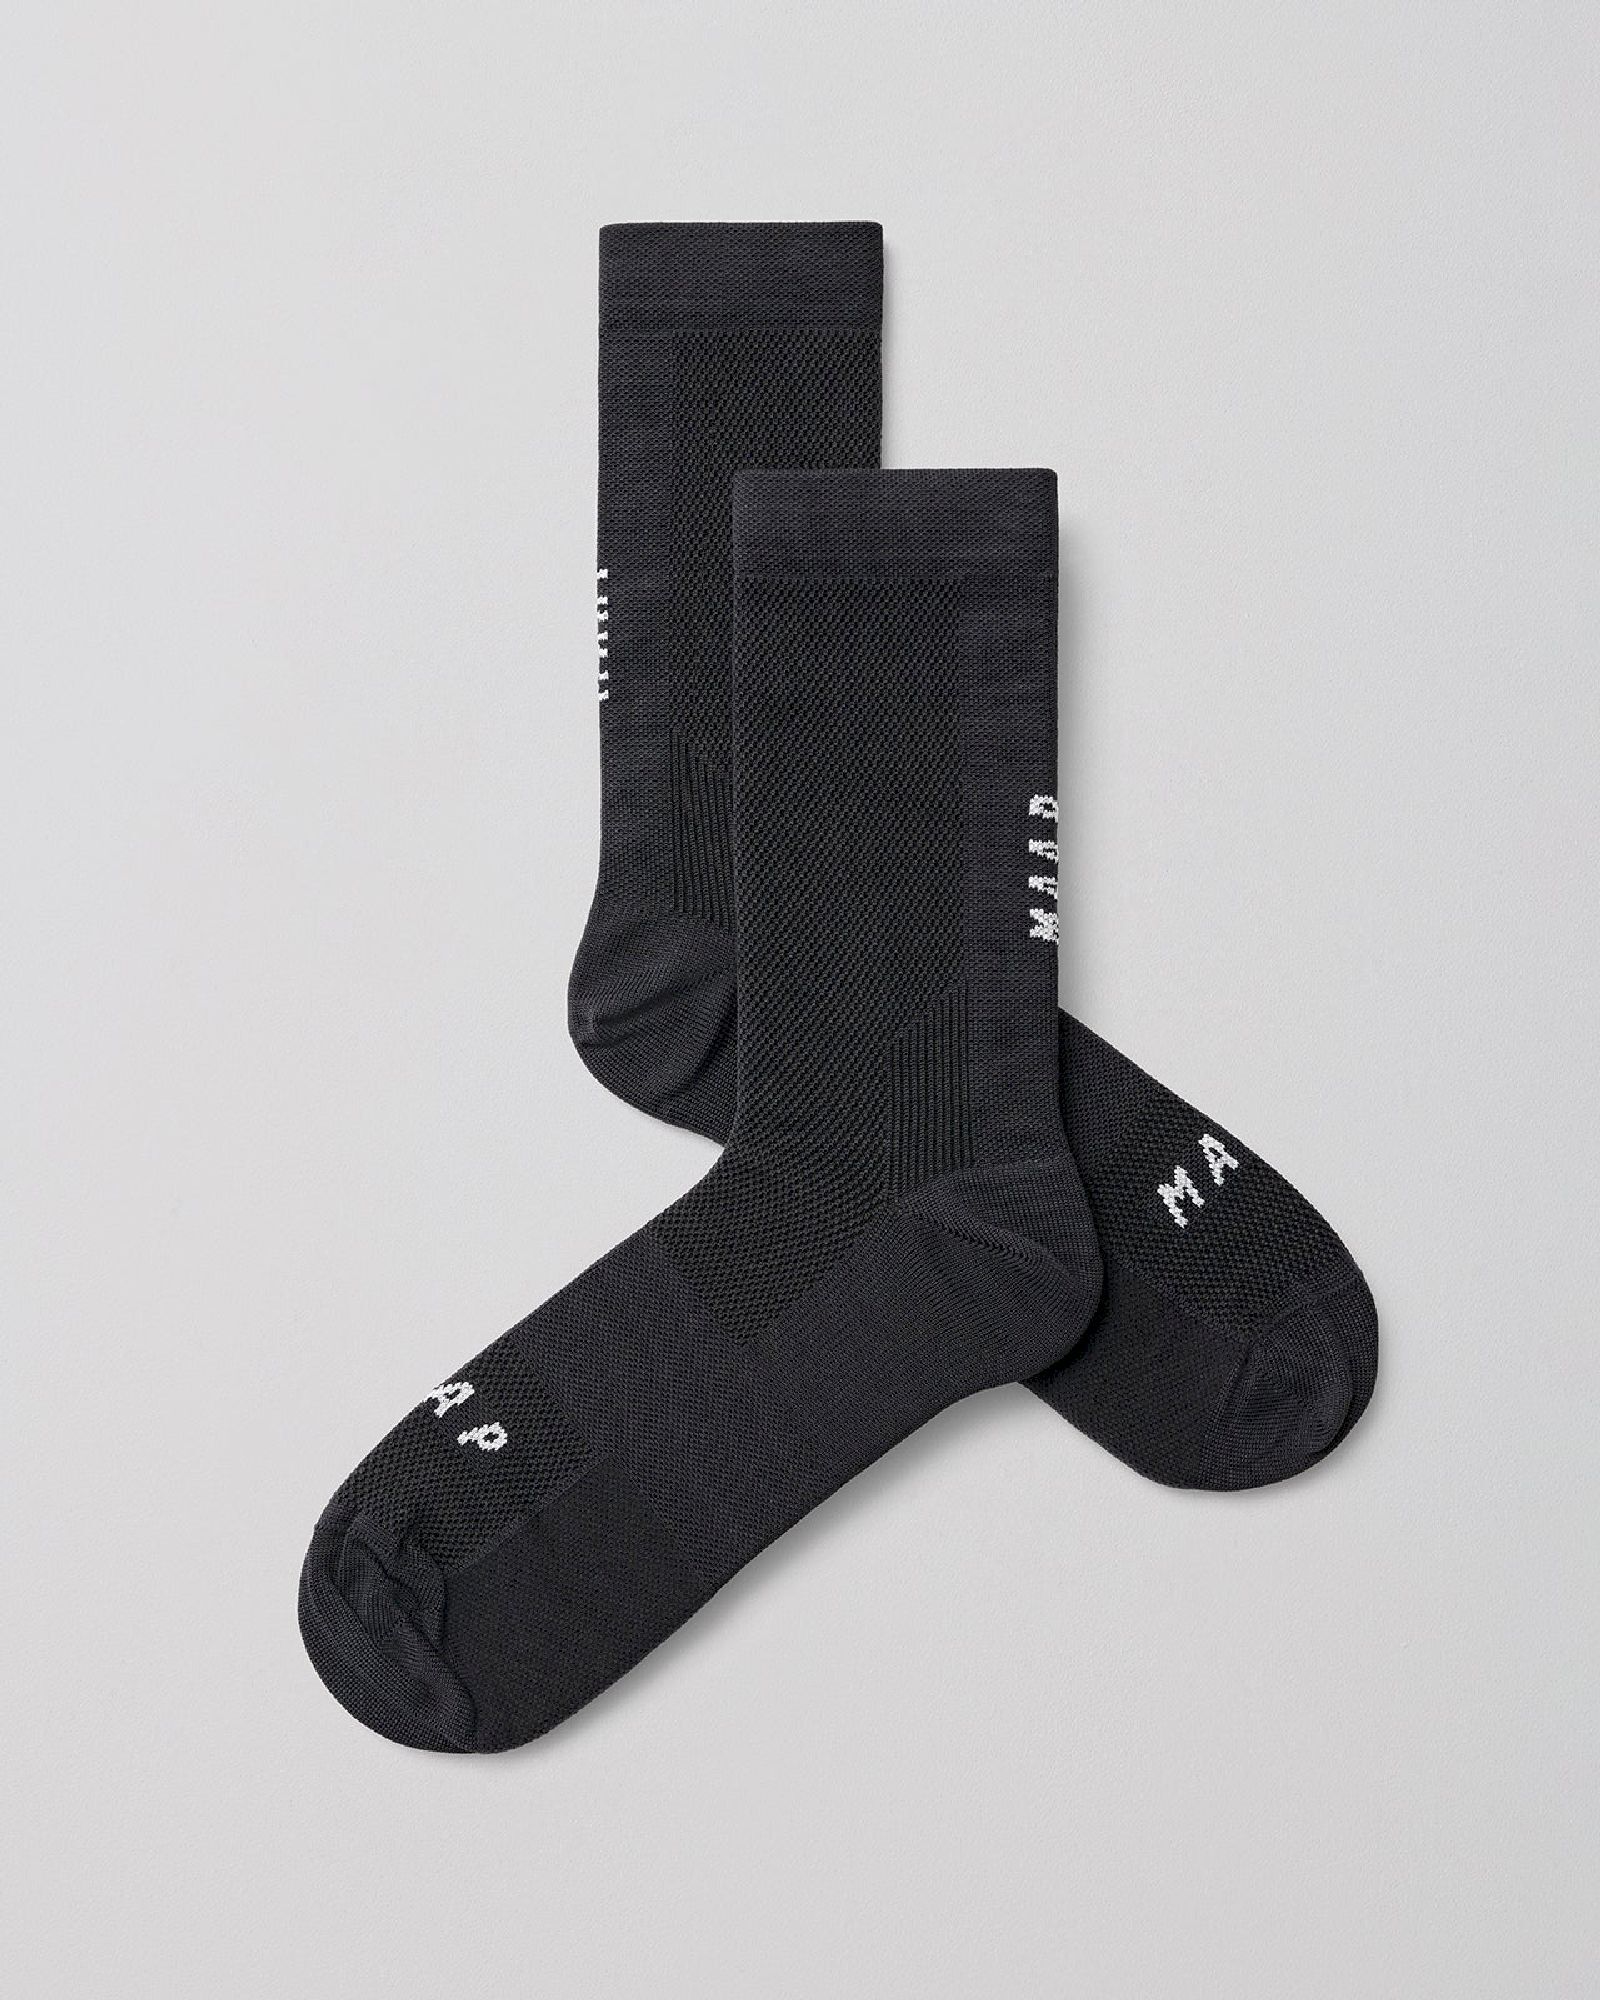 Maap Division Mono - Chaussettes vélo | Hardloop